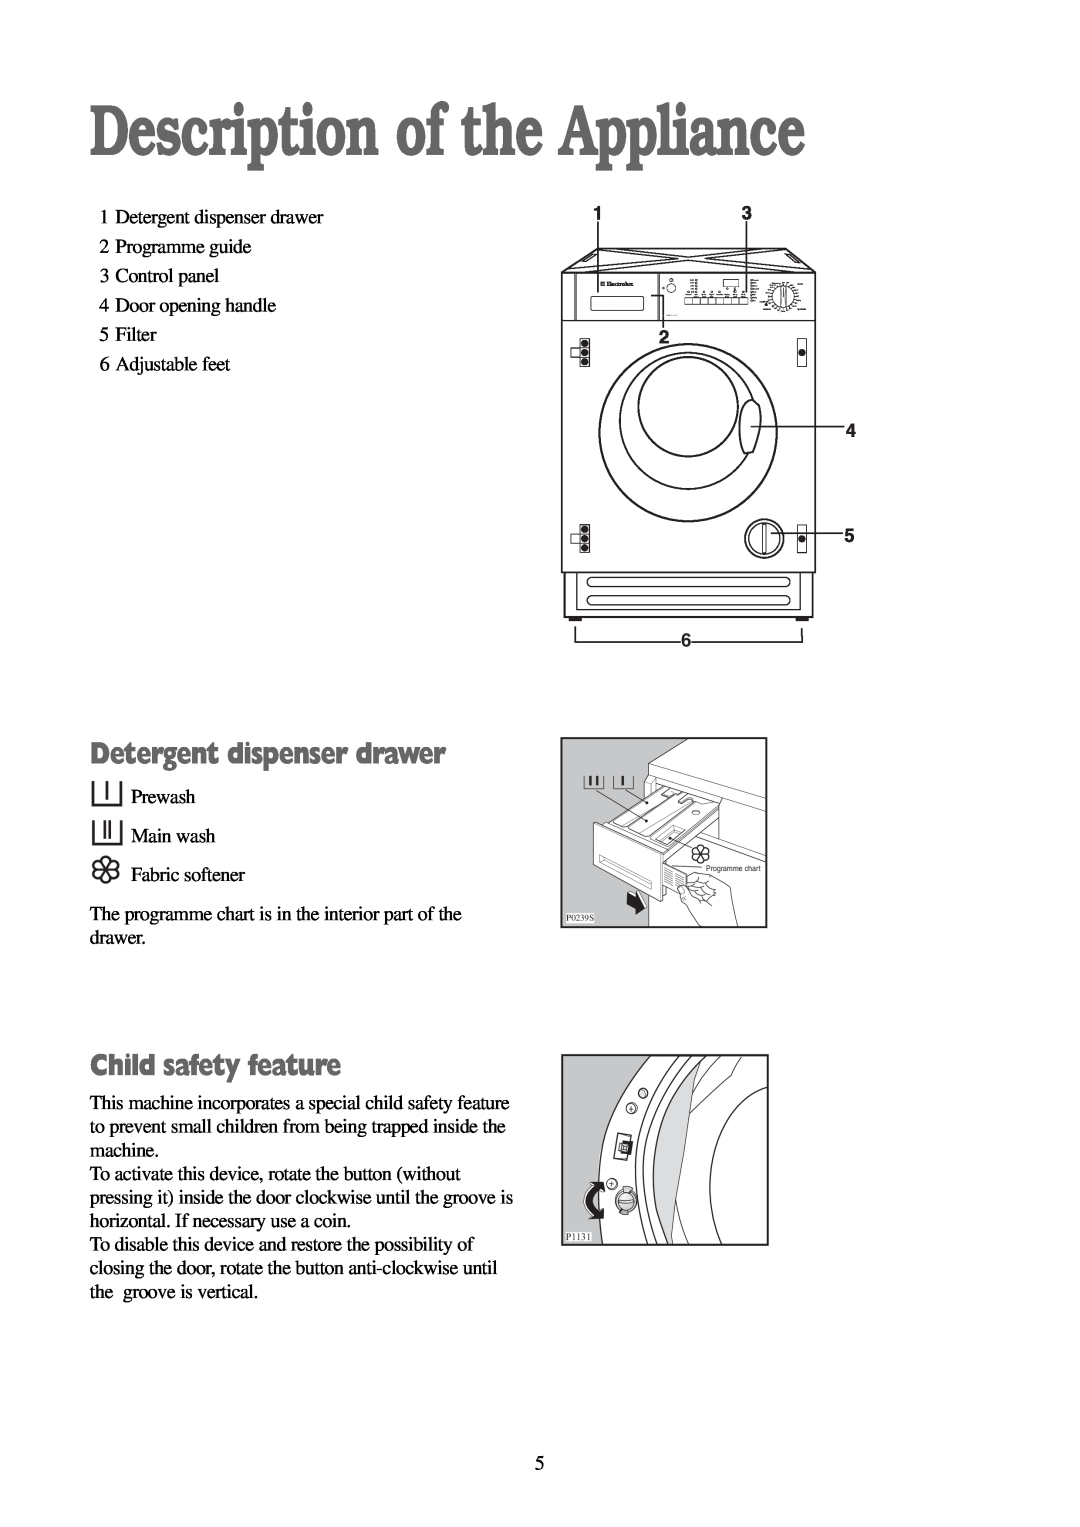 Electrolux EWD 1419 I manual Description of the Appliance, Detergent dispenser drawer, Child safety feature 